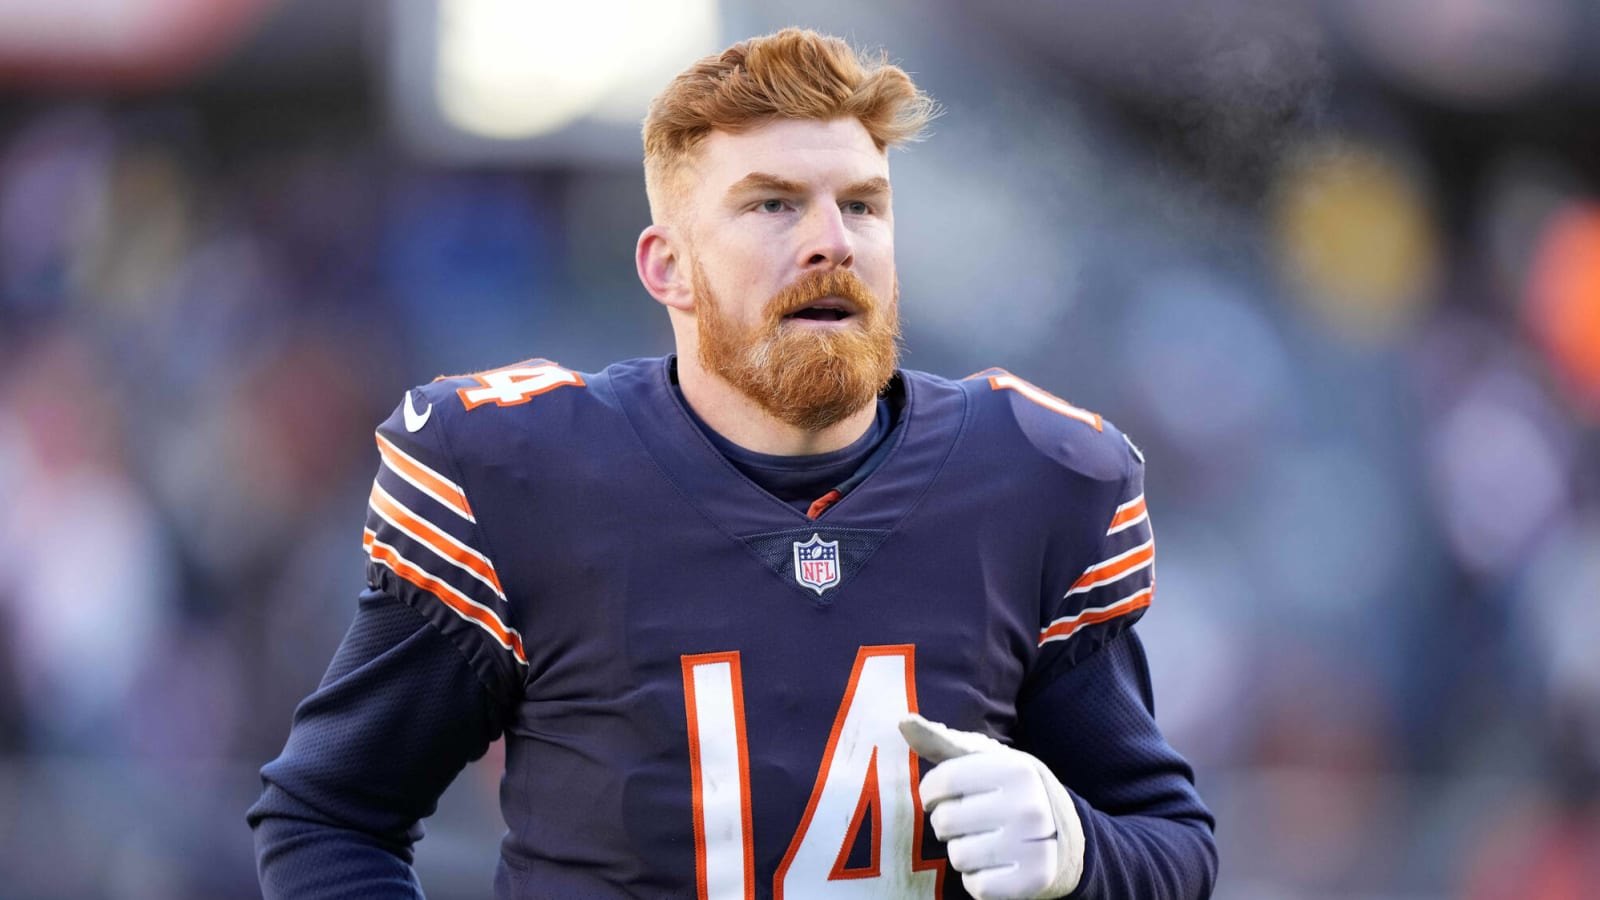 Ex-Bears Pro Bowl Starter Signs With Saints